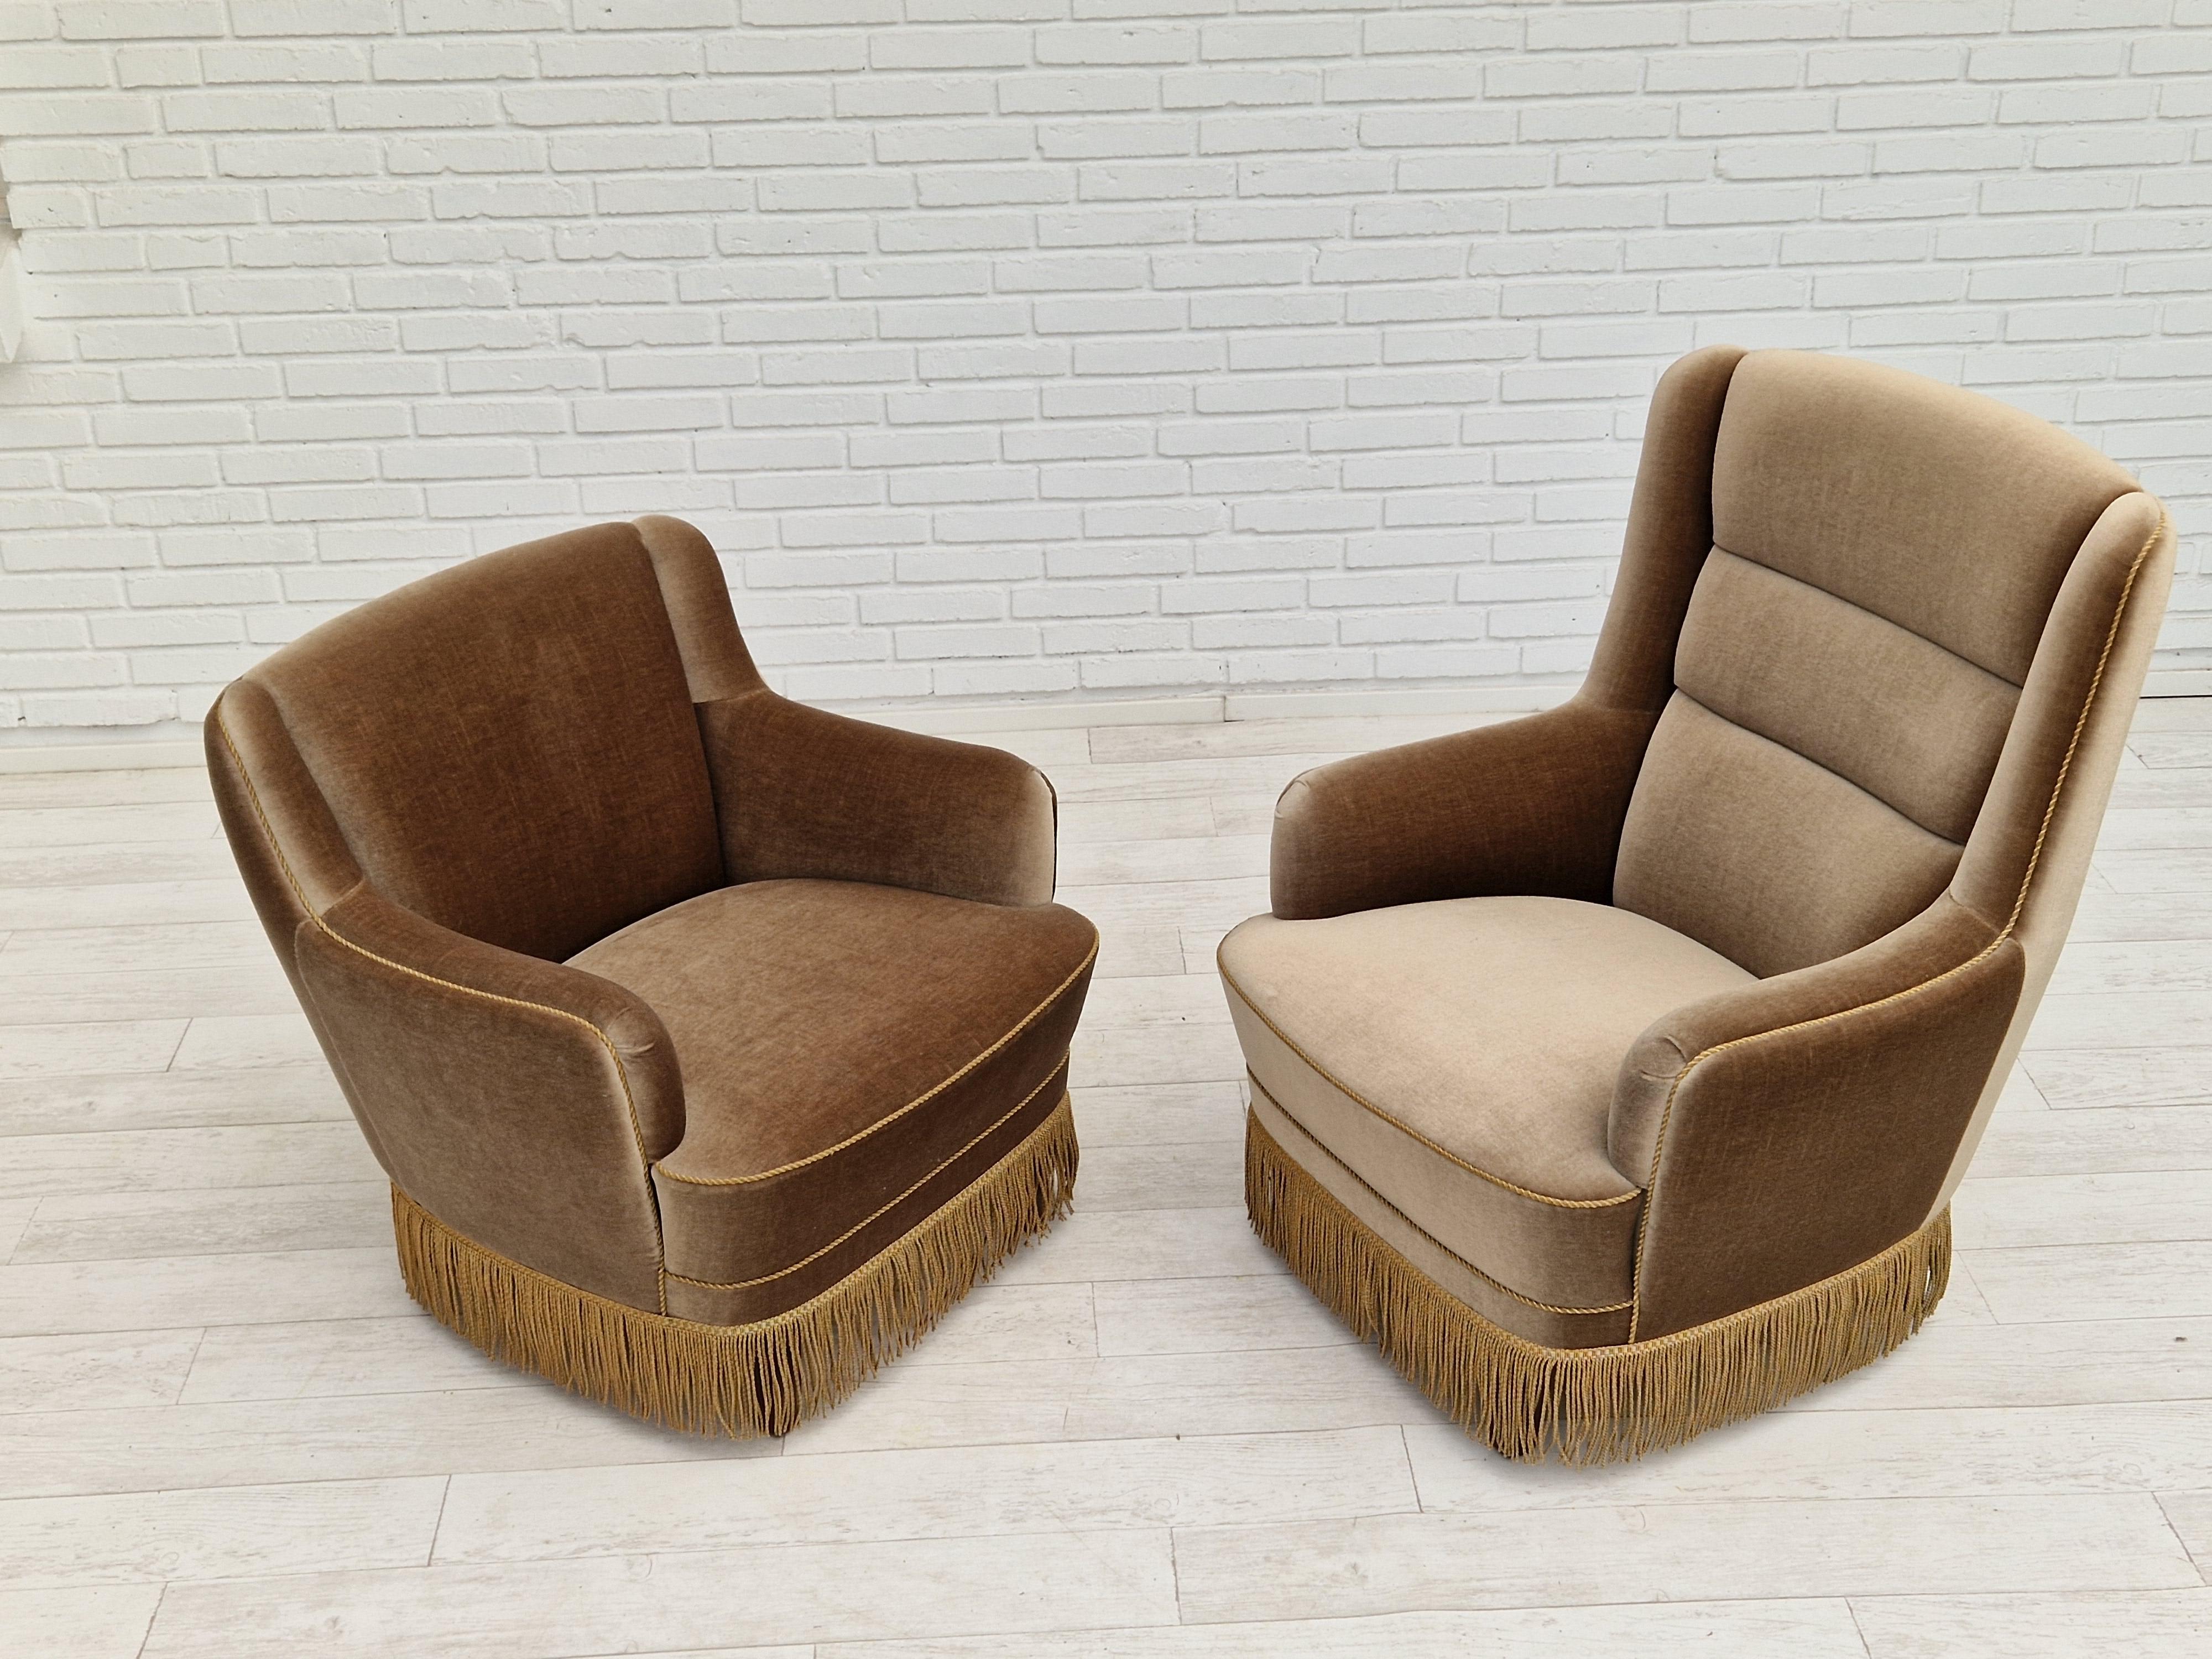 1970s, pair of Danish chairs. Original green velour in very good condition, no smells and no stains. Original springs in the seat. Beech wood legs. ( H 78cm - low chair, H 99cm - high chair ).